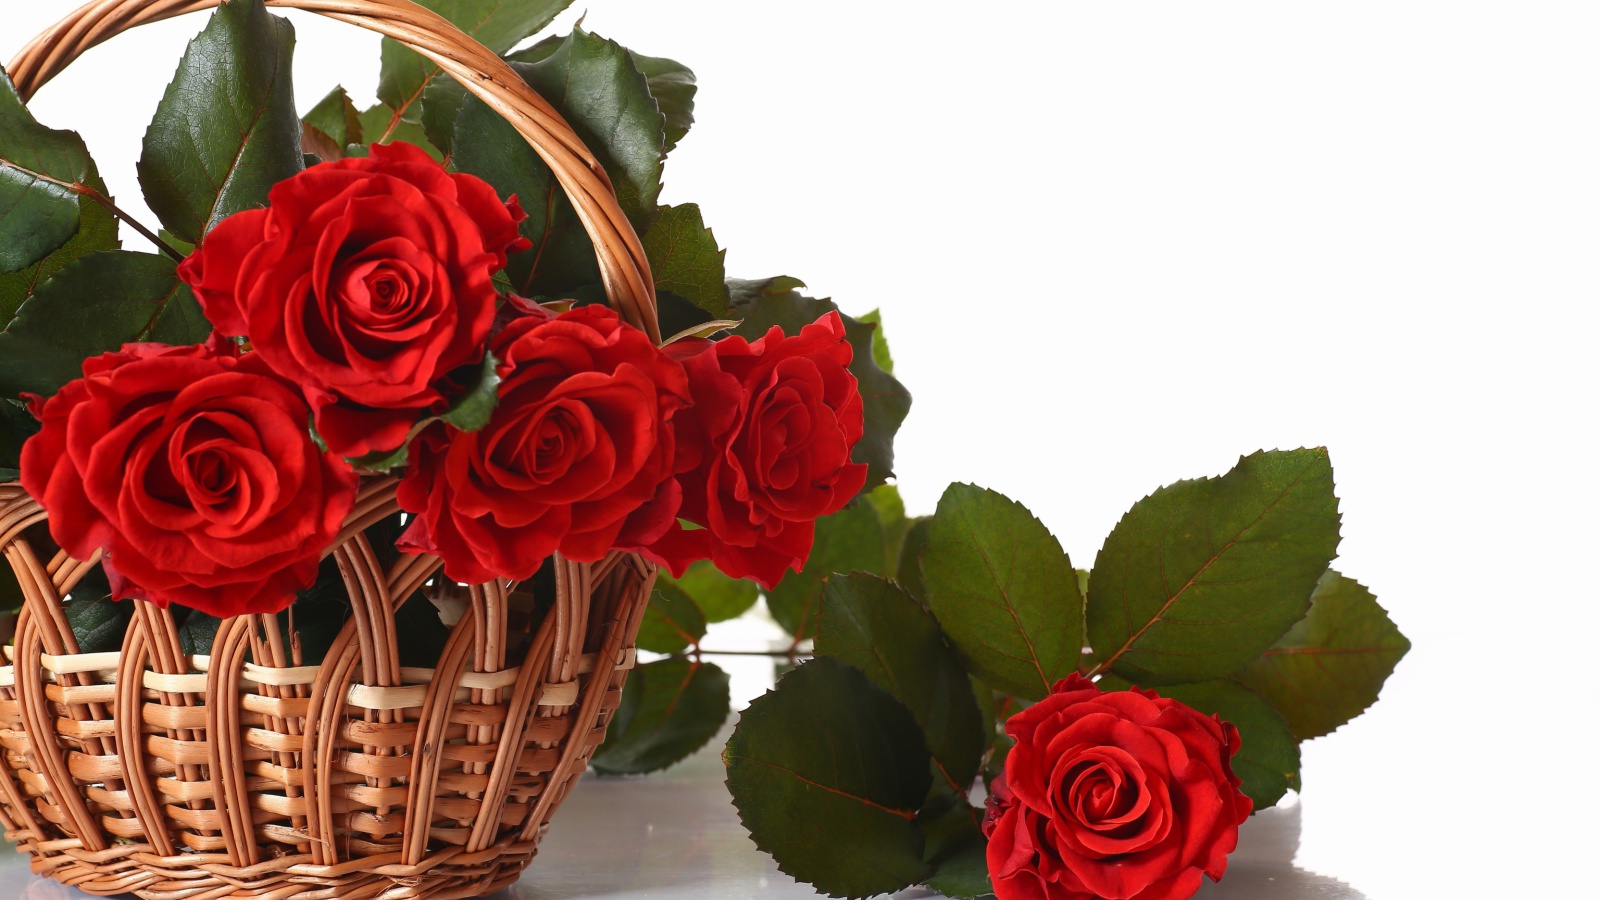 Basket with Roses wallpaper 1600x900